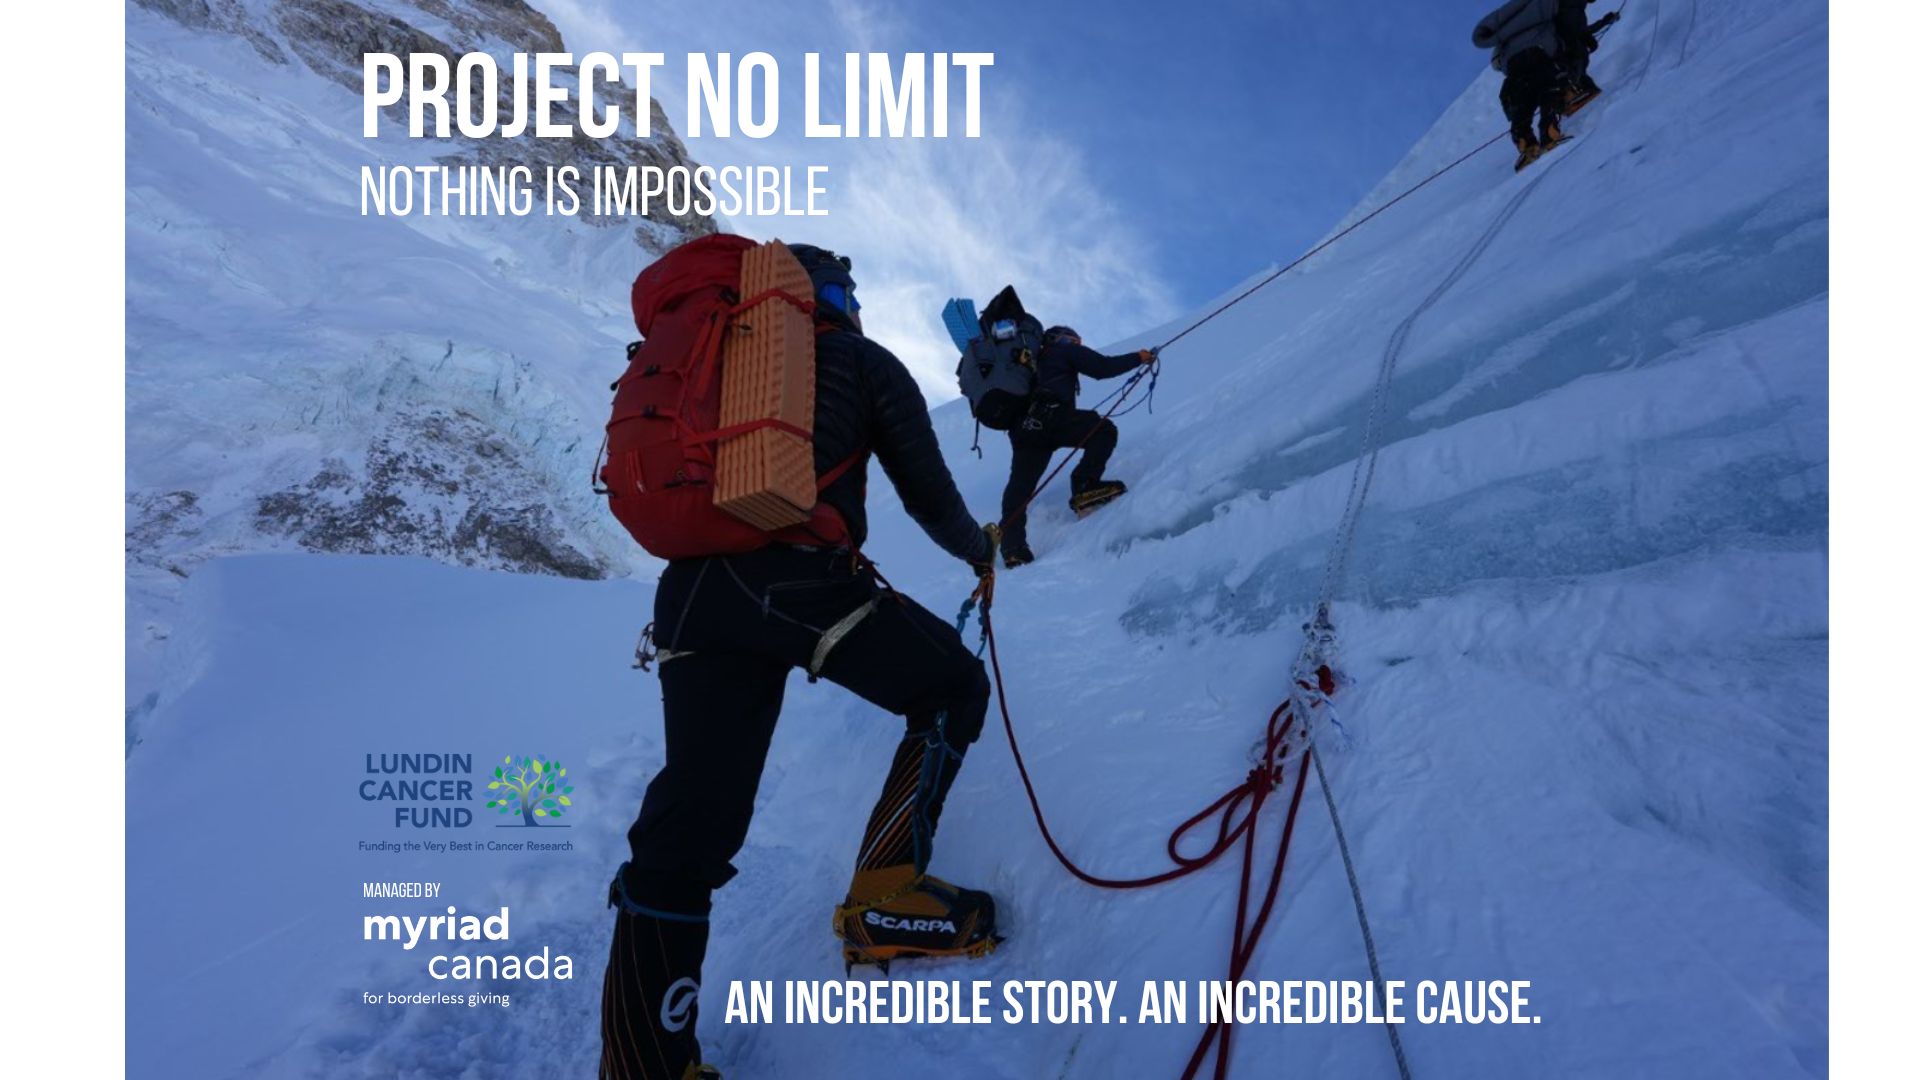 Lundin Cancer Fund Charity Gala – “Project No Limit”